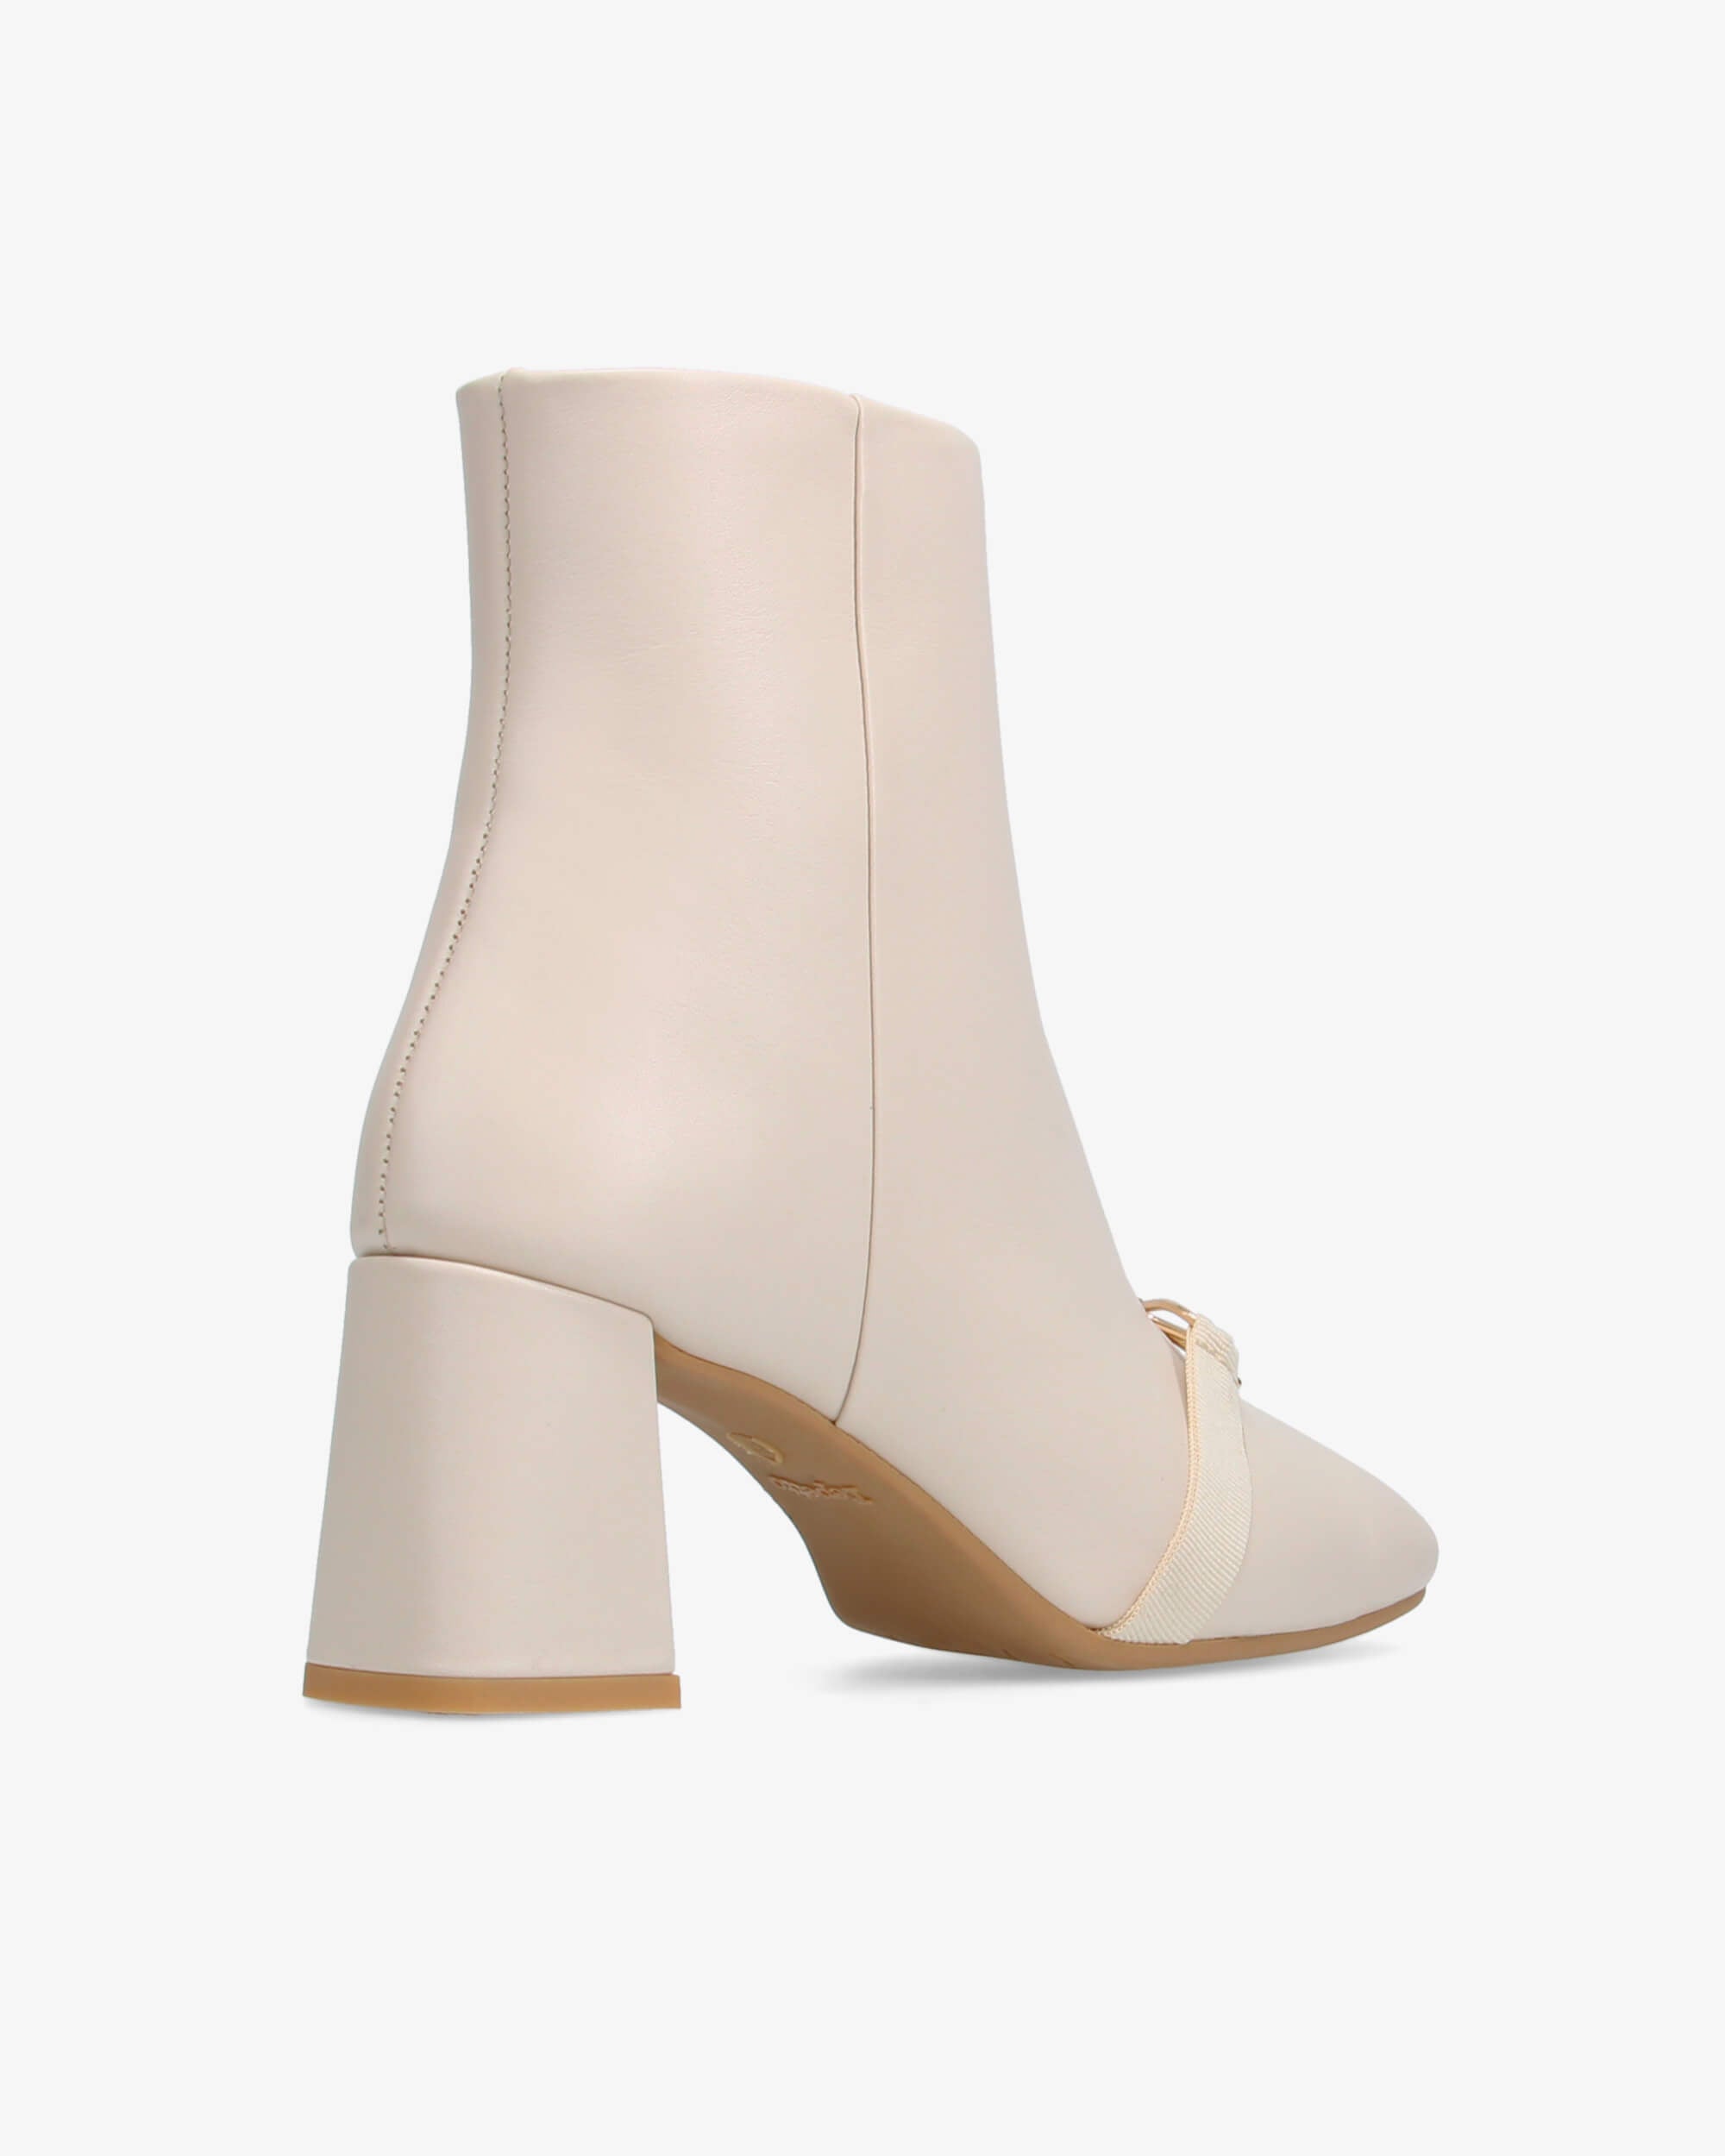 Phoebe metallic bow ankle boots